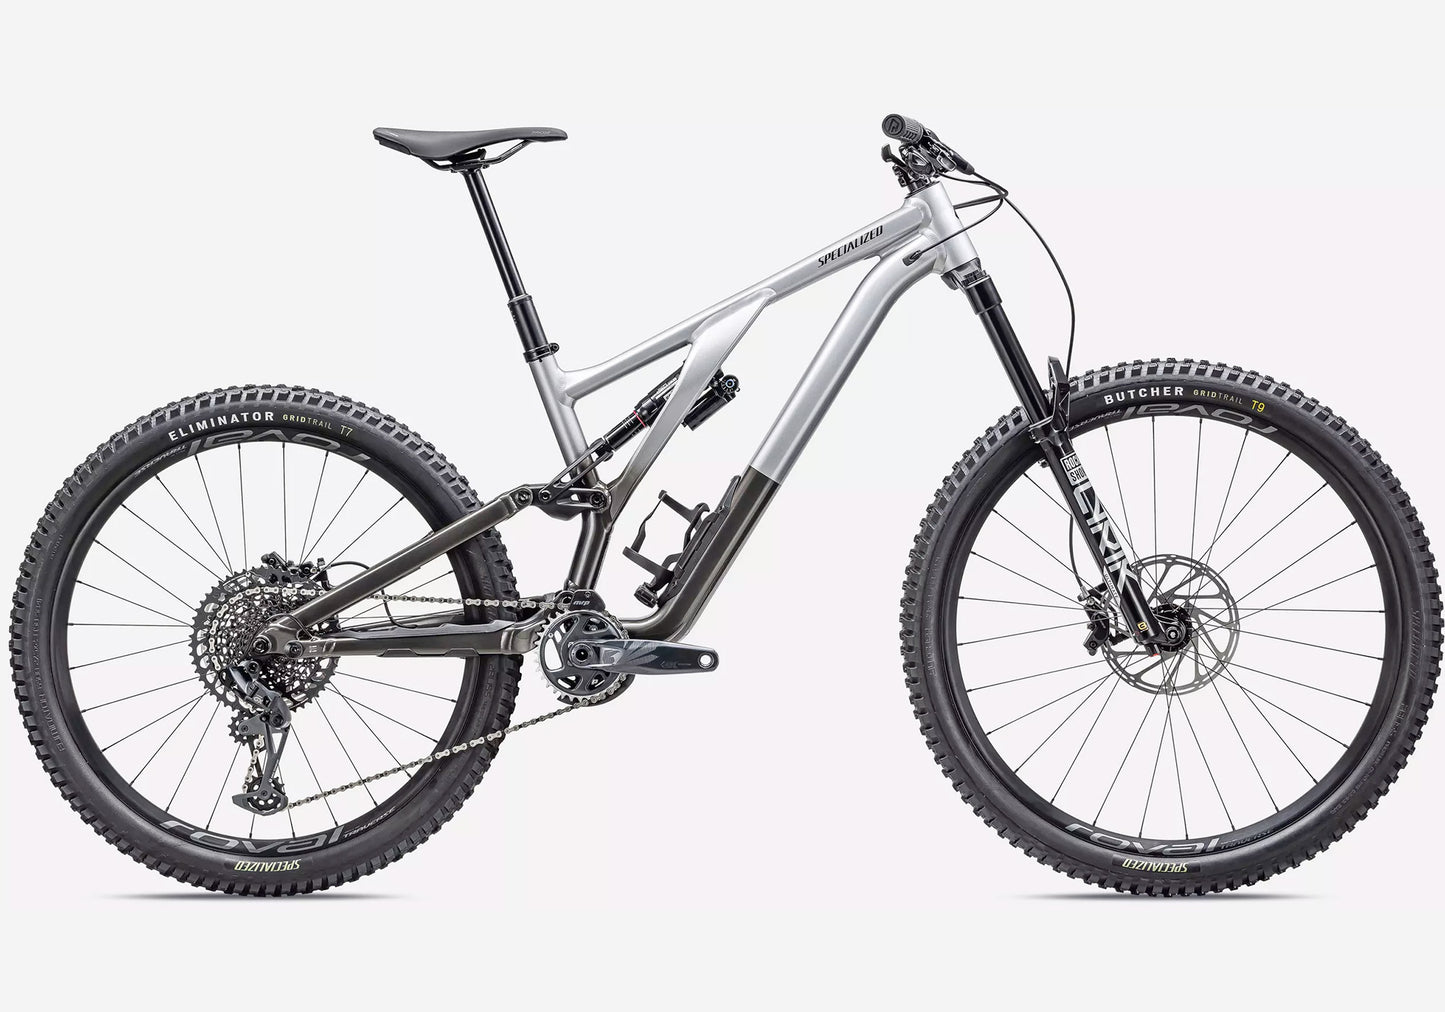 Specialized Stumpjumper EVO Elite Alloy Unisex Mountain Bike - Gloss Silver Dust. SIZE S3 ONLY. CALL TO ORDER.